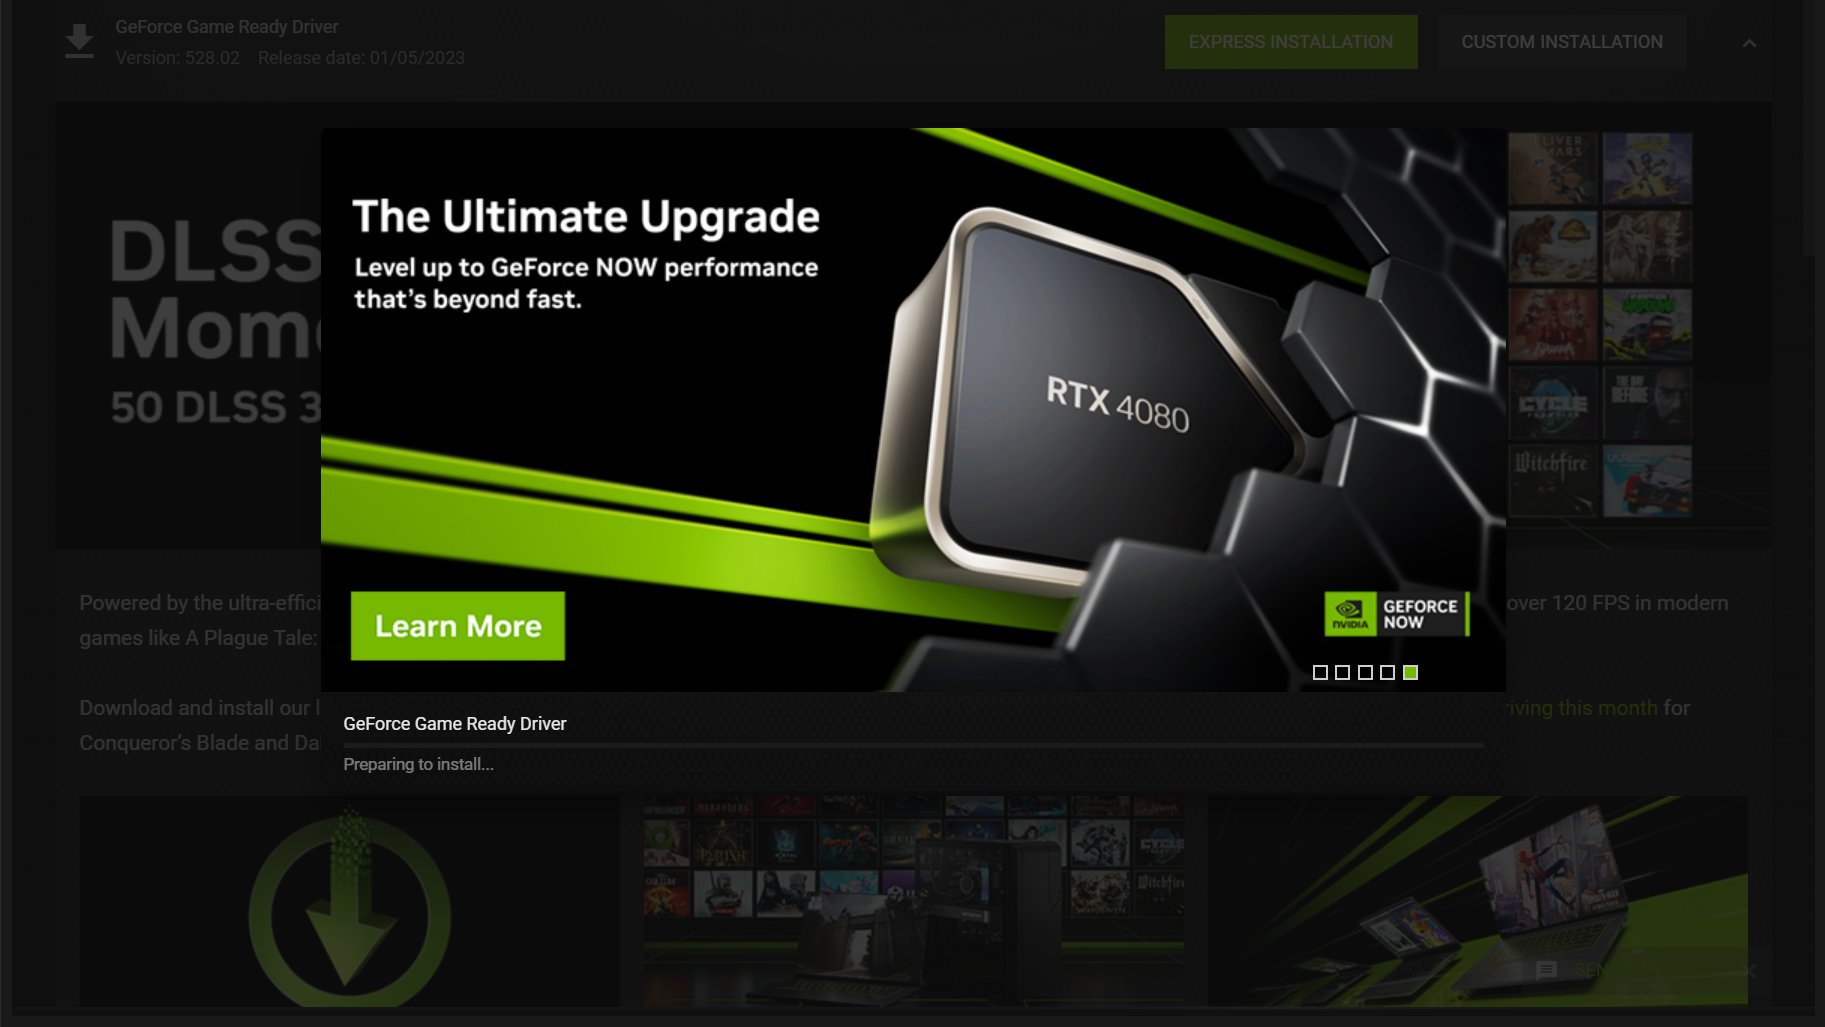 Visit the Nvidia website and download the latest drivers for your graphics card.
Install the updated drivers and restart your computer.